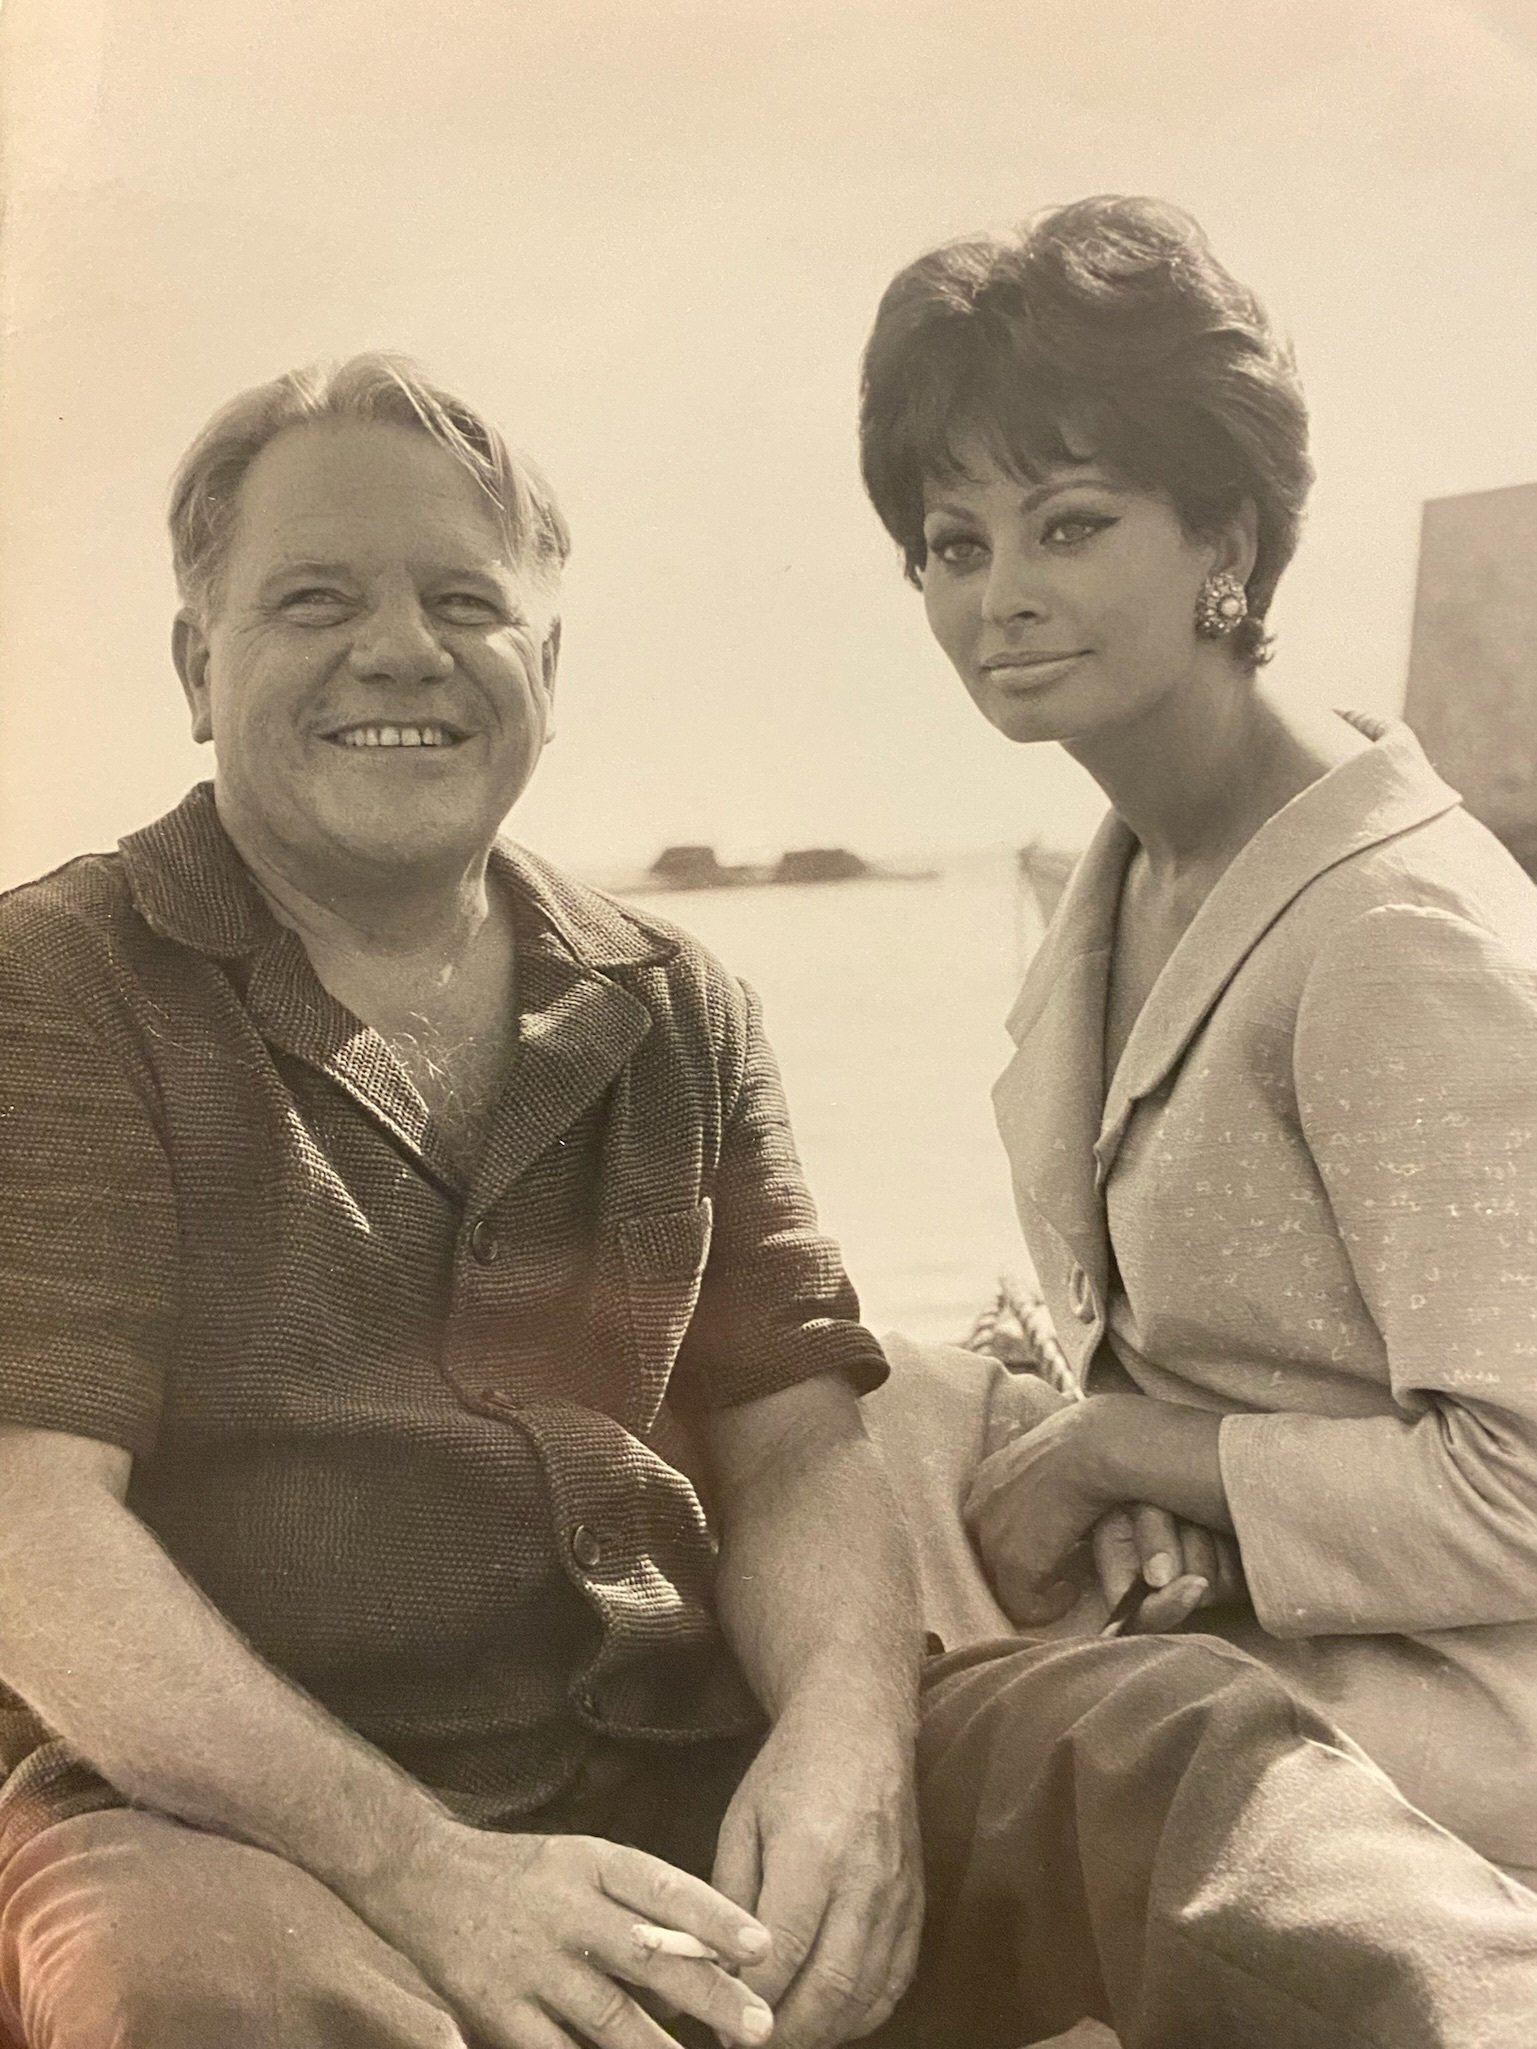 Lawrence Durrell with Sophia Loren (Photographed by BOB PENN @ Paramount Pictures & Screenlife Est thanks to Daniel Unger)